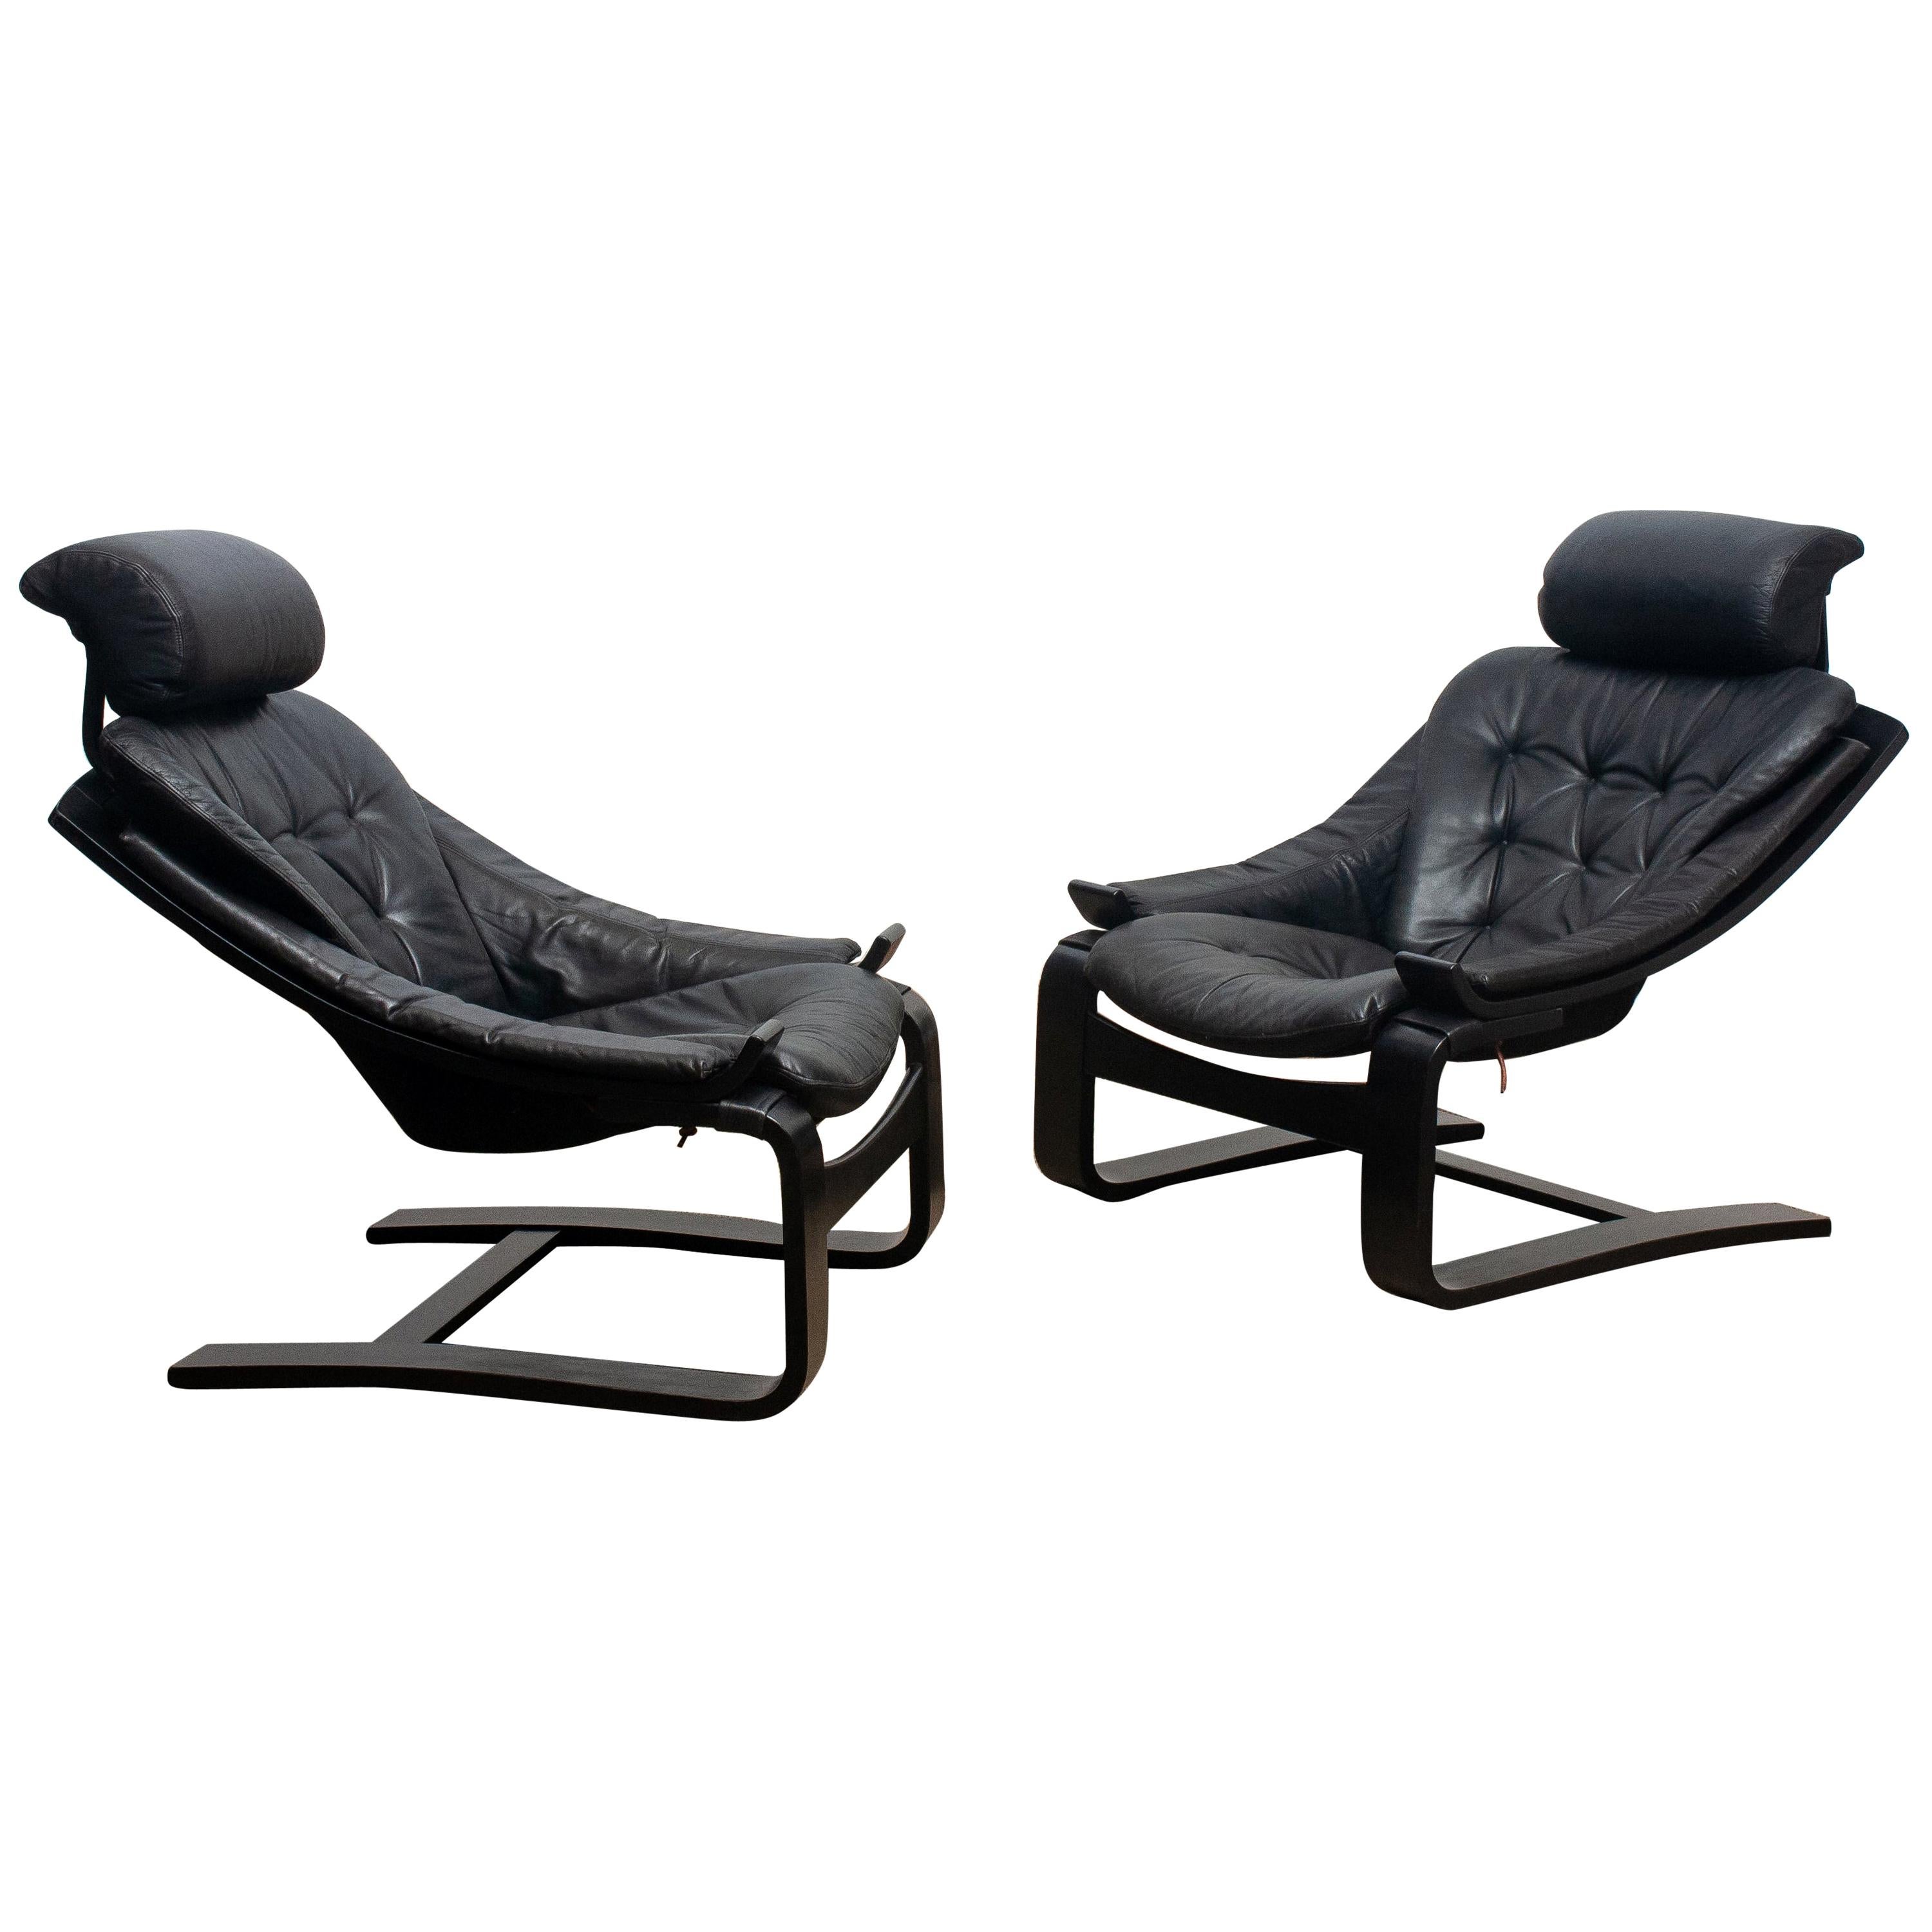 1970s Pair of Kroken Lounge Chairs by Ake Fribytter for Nelo Sweden in Leather